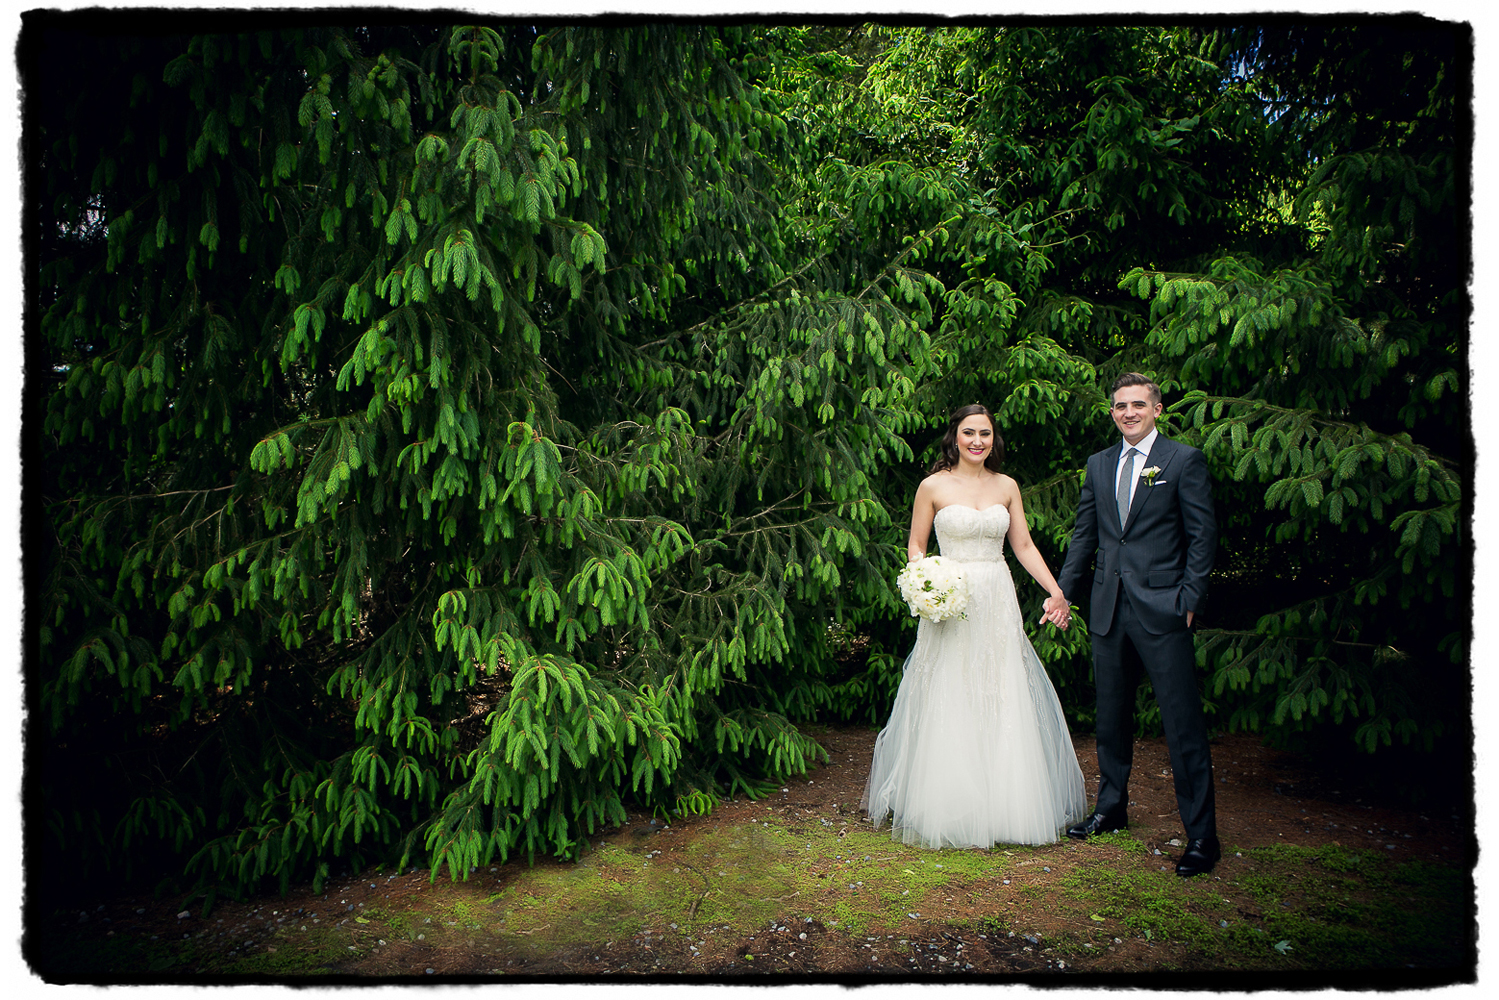 The incredible trees on the grounds at Lyndhurst Castle was the perfect rich background for this couple portrait.